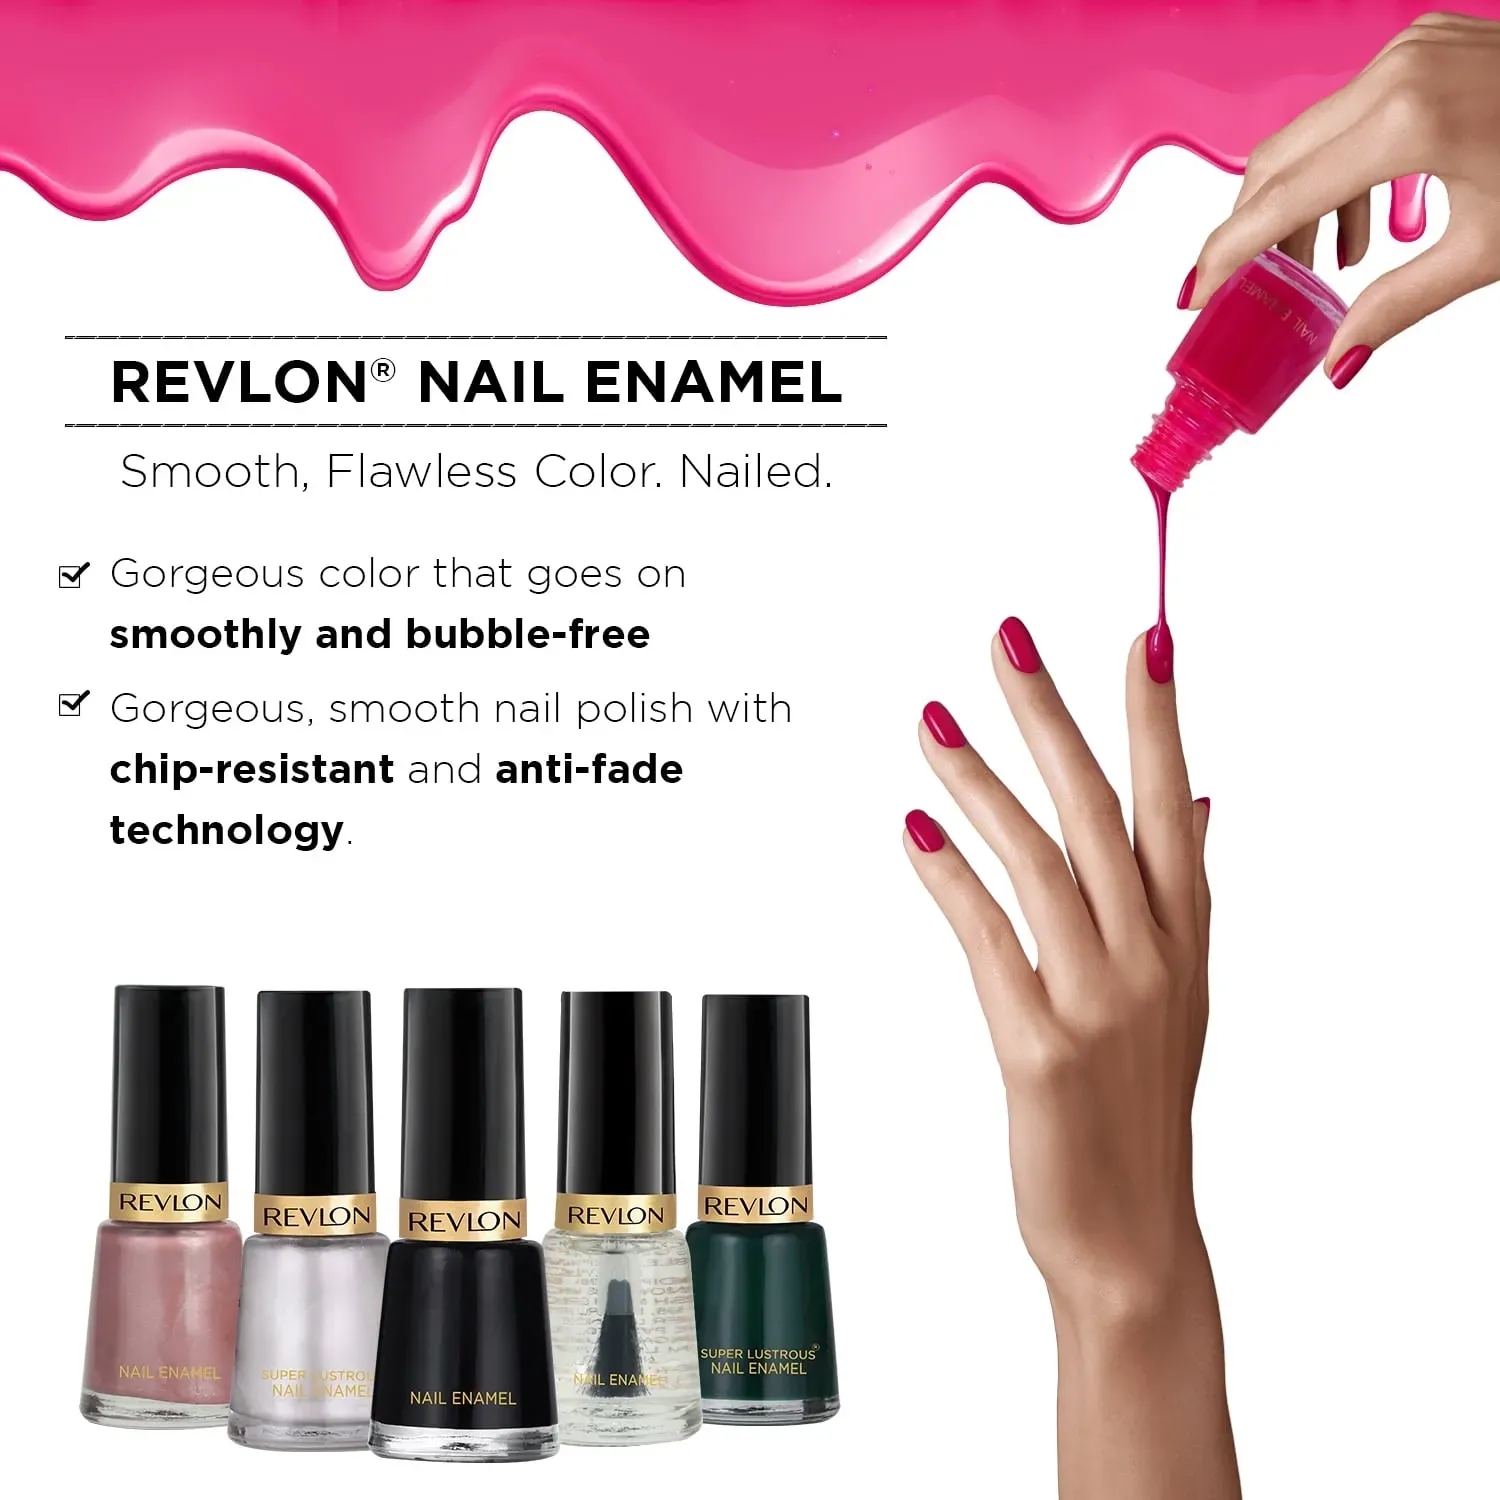 Revlon Nail Enamel Illusion Price in India, Full Specifications & Offers |  DTashion.com